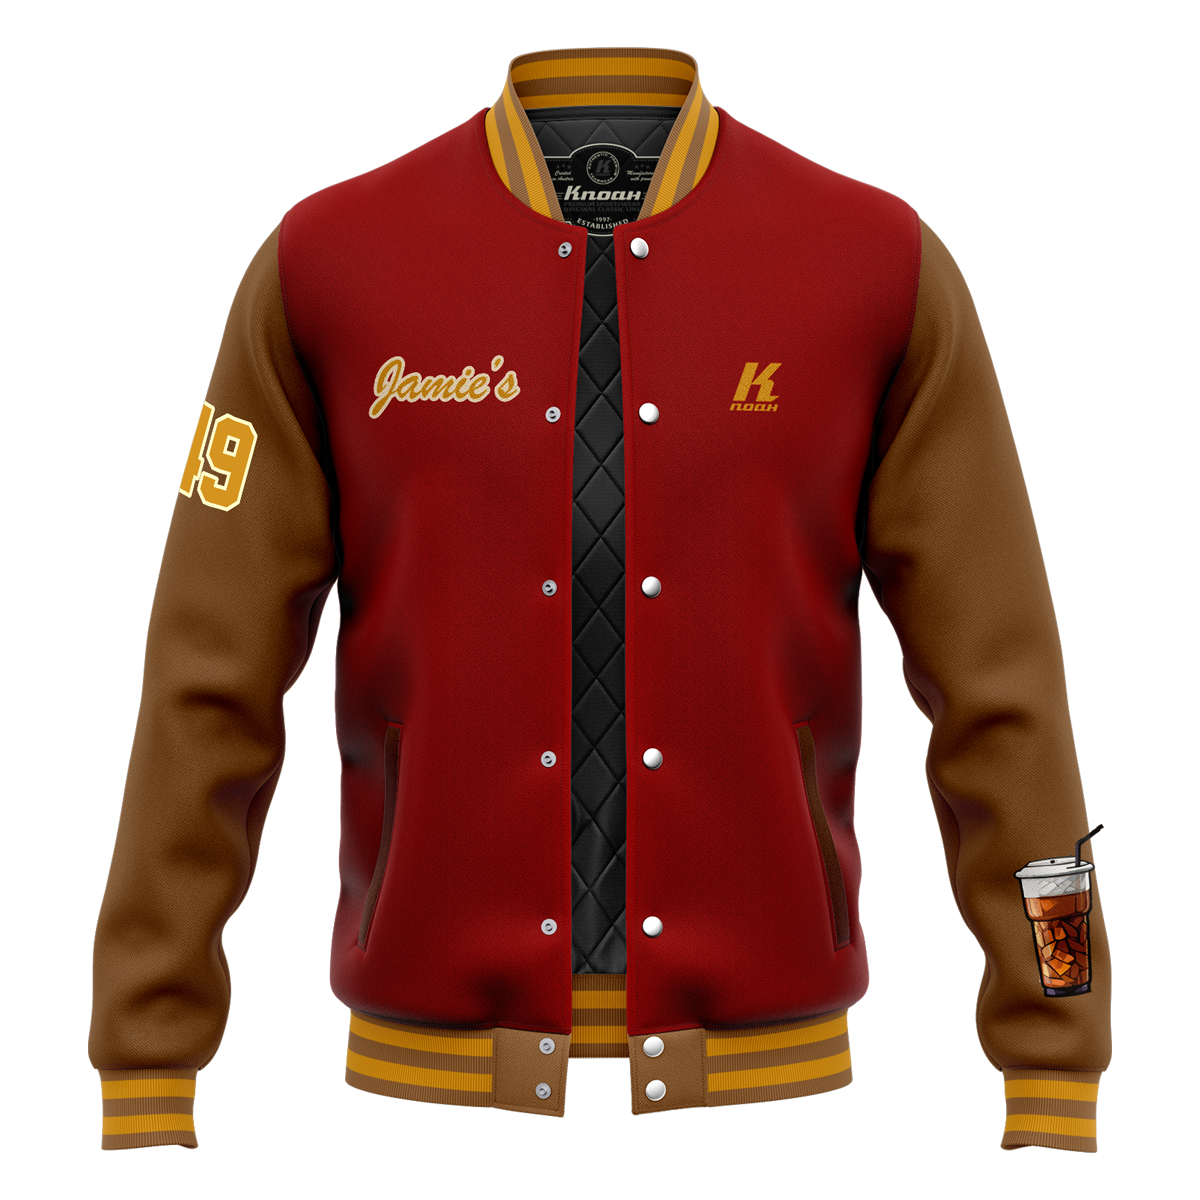 Day 5: "Jamie's Burger" Authentic Varsity Jacket with Playernumber/Initials